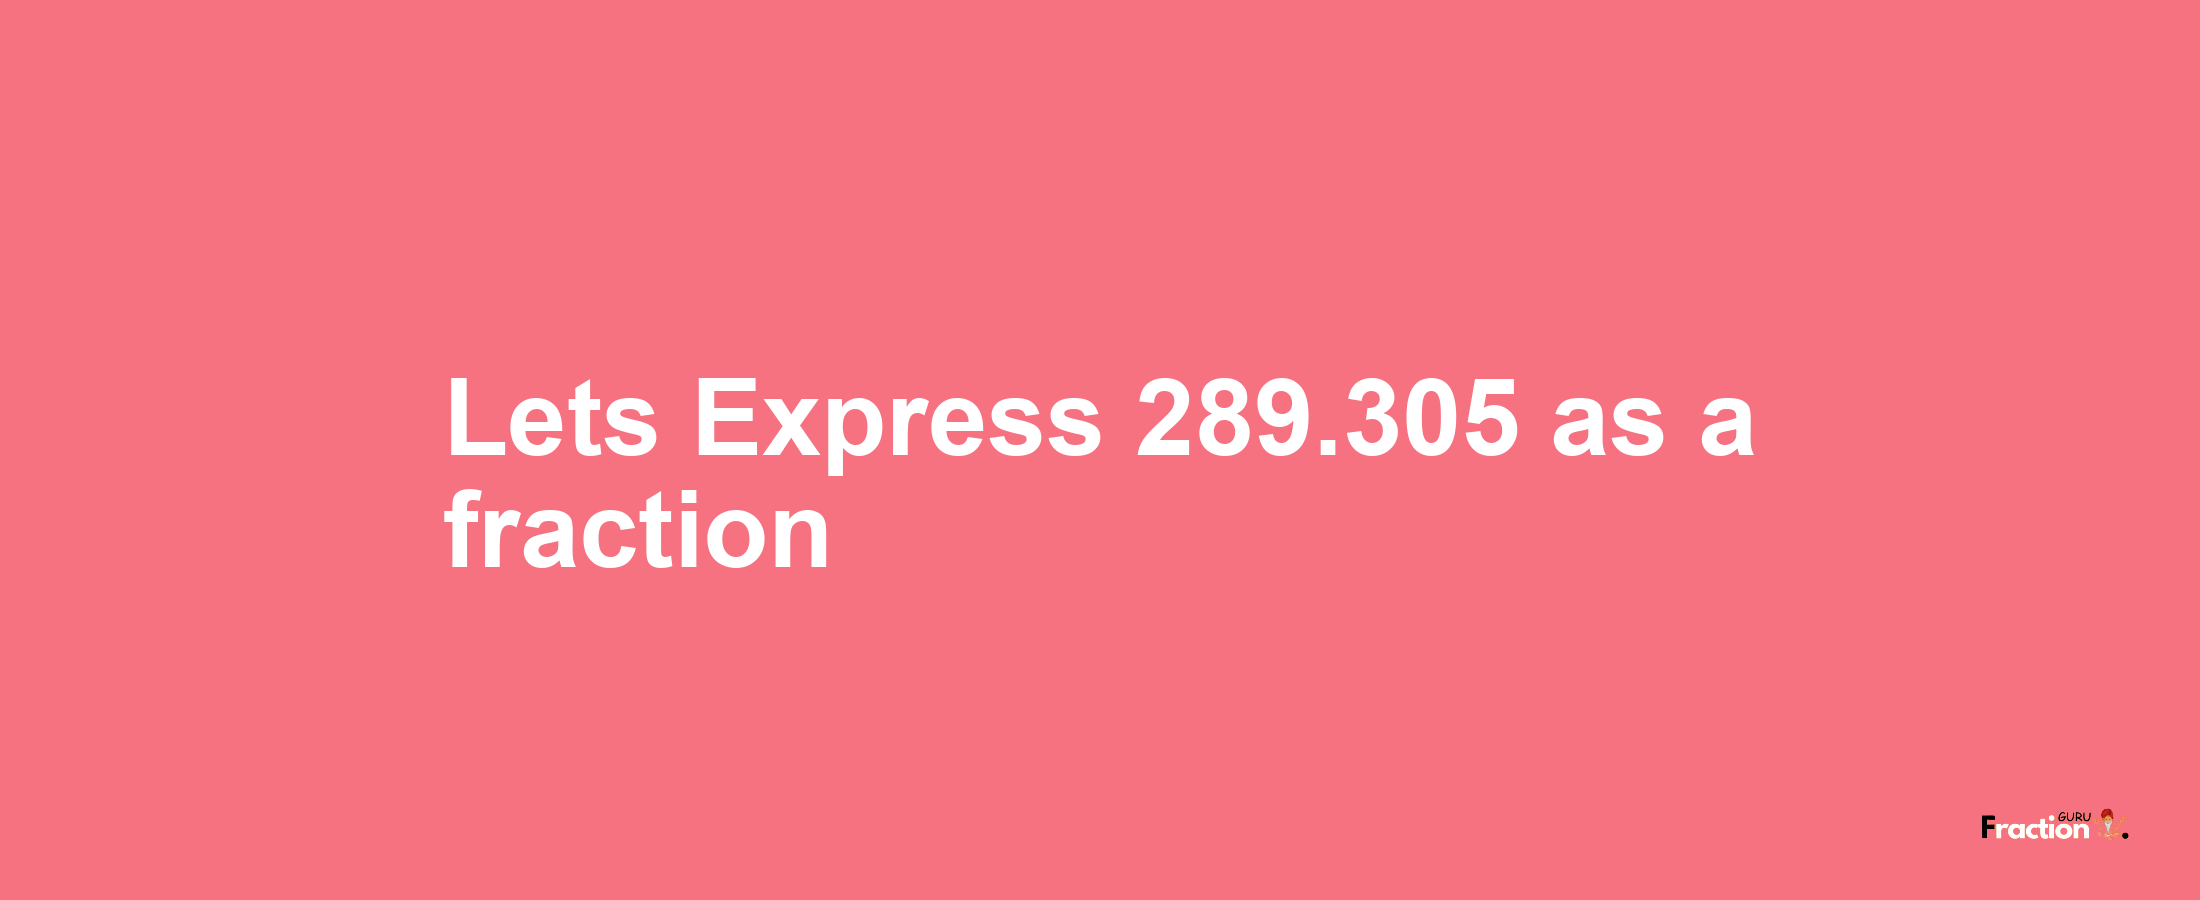 Lets Express 289.305 as afraction